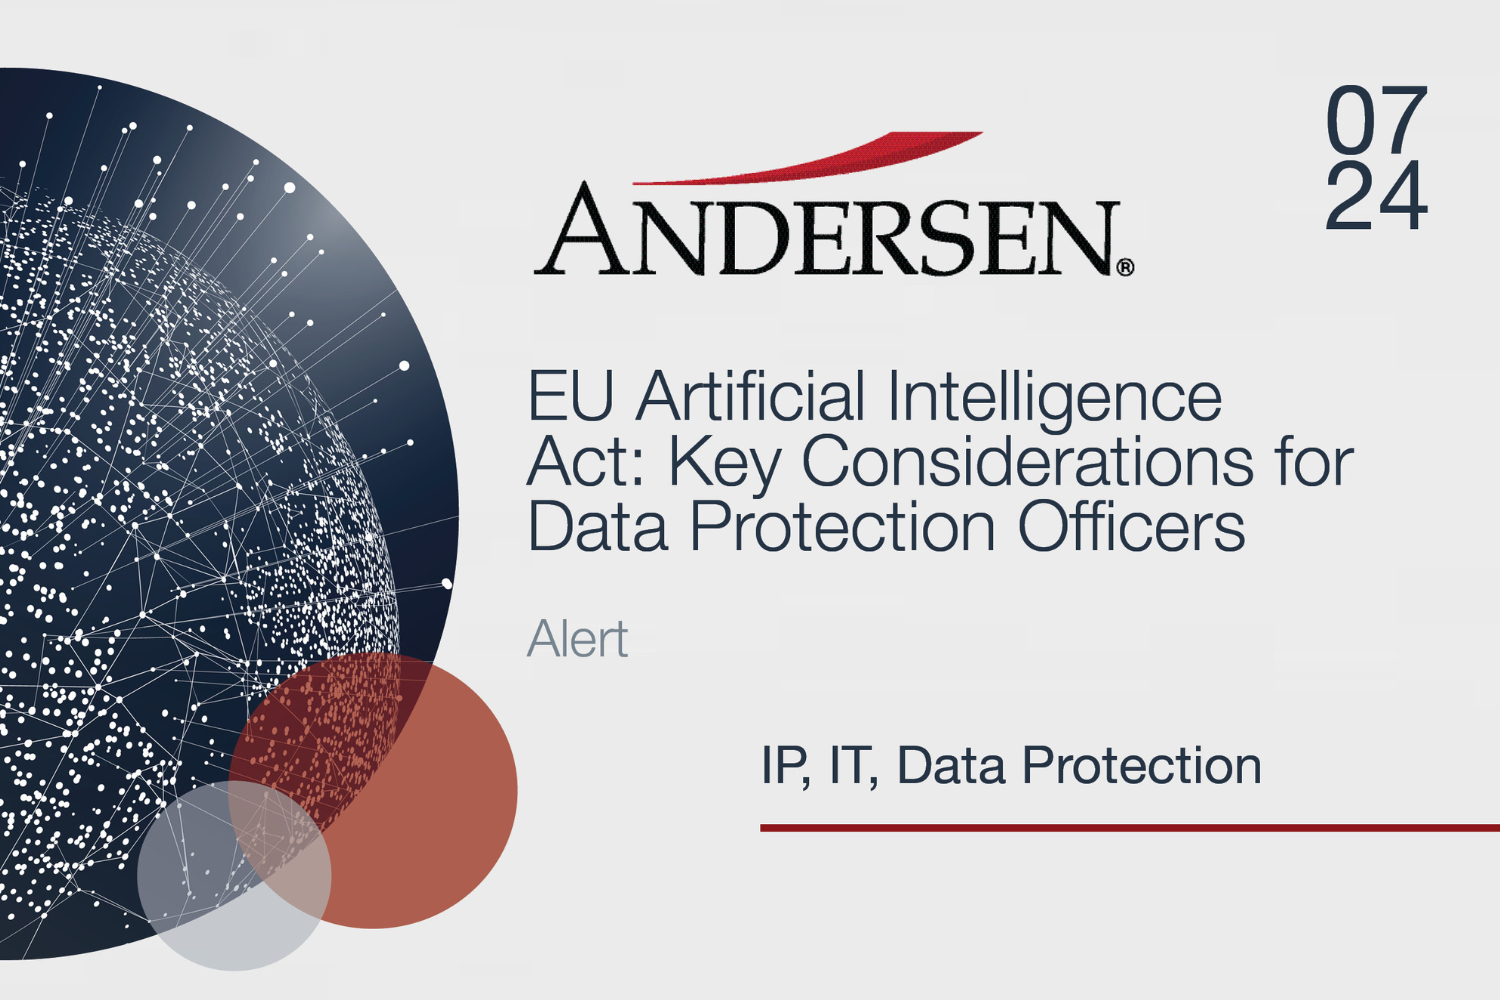 EU Artificial Intelligence Act: Key Considerations for Data Protection Officers